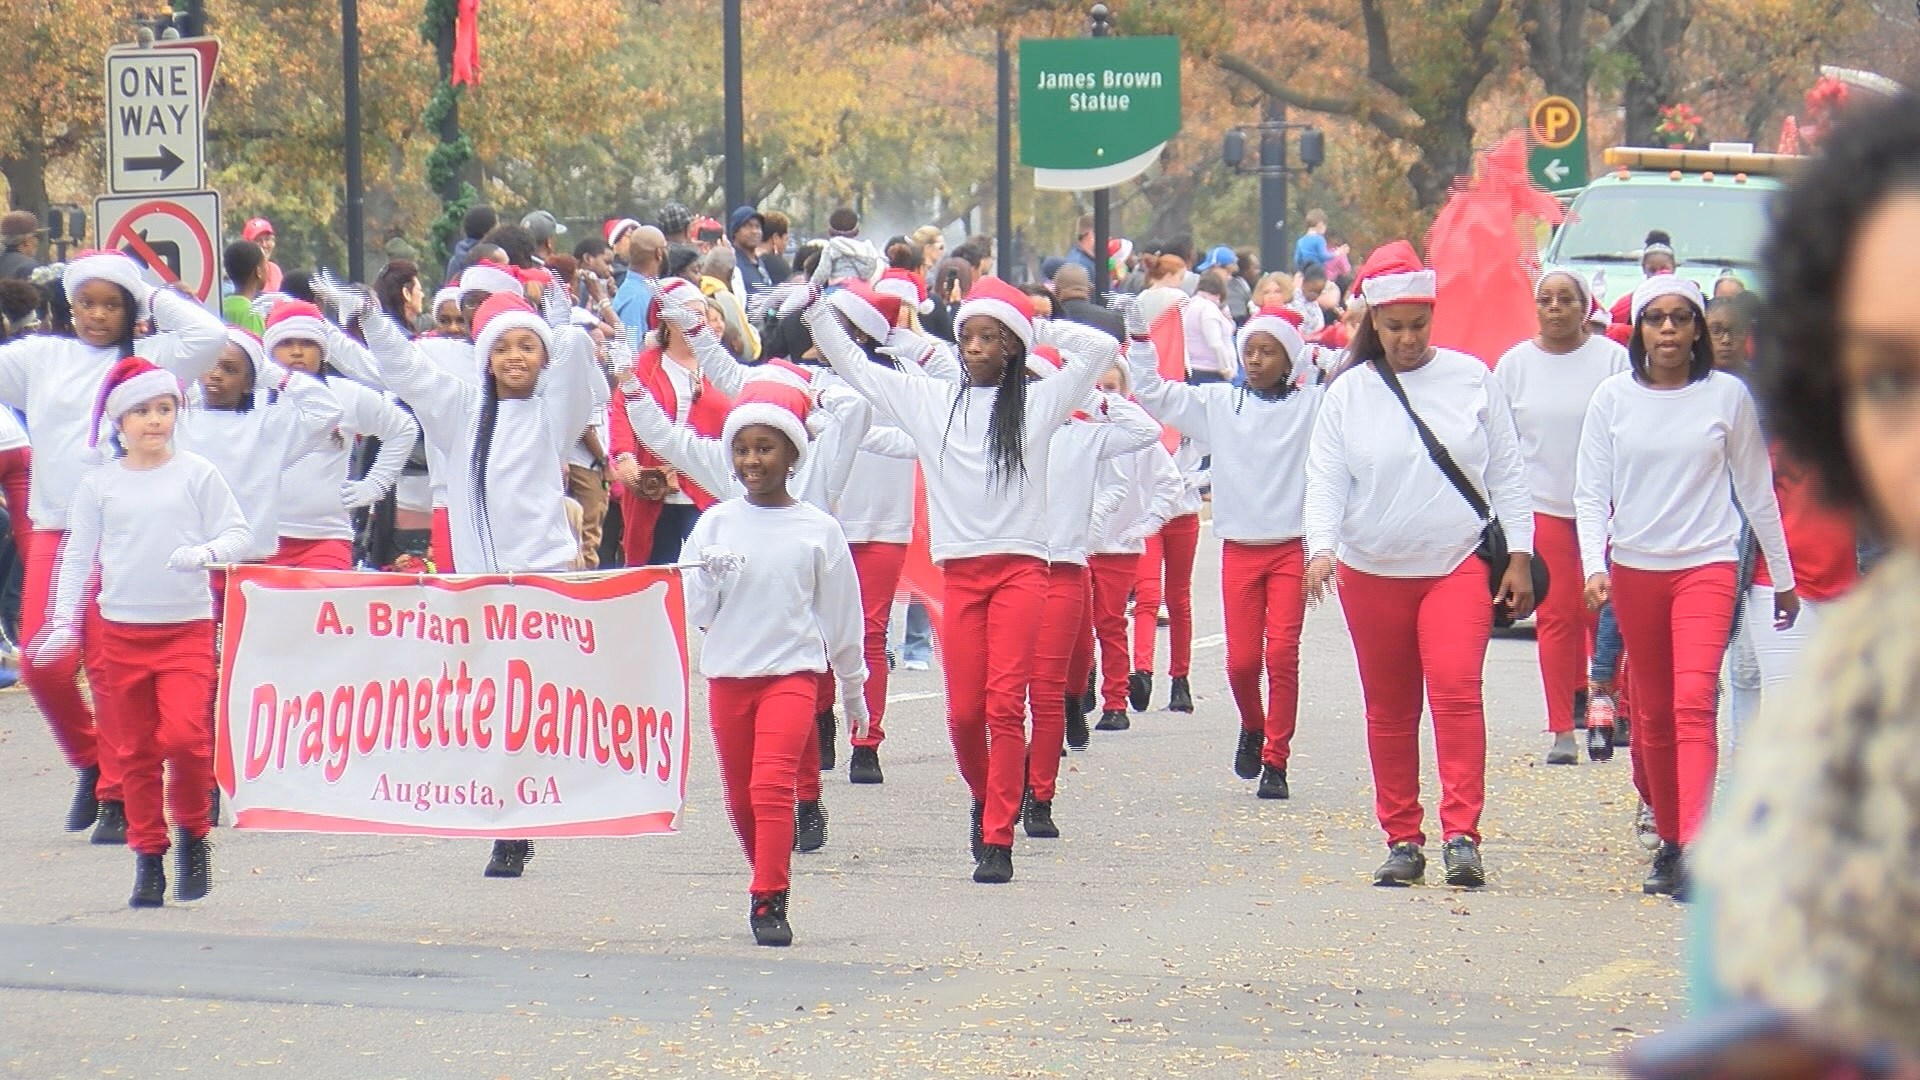 Augusta's Christmas parade and celebration held downtown KXXV Central